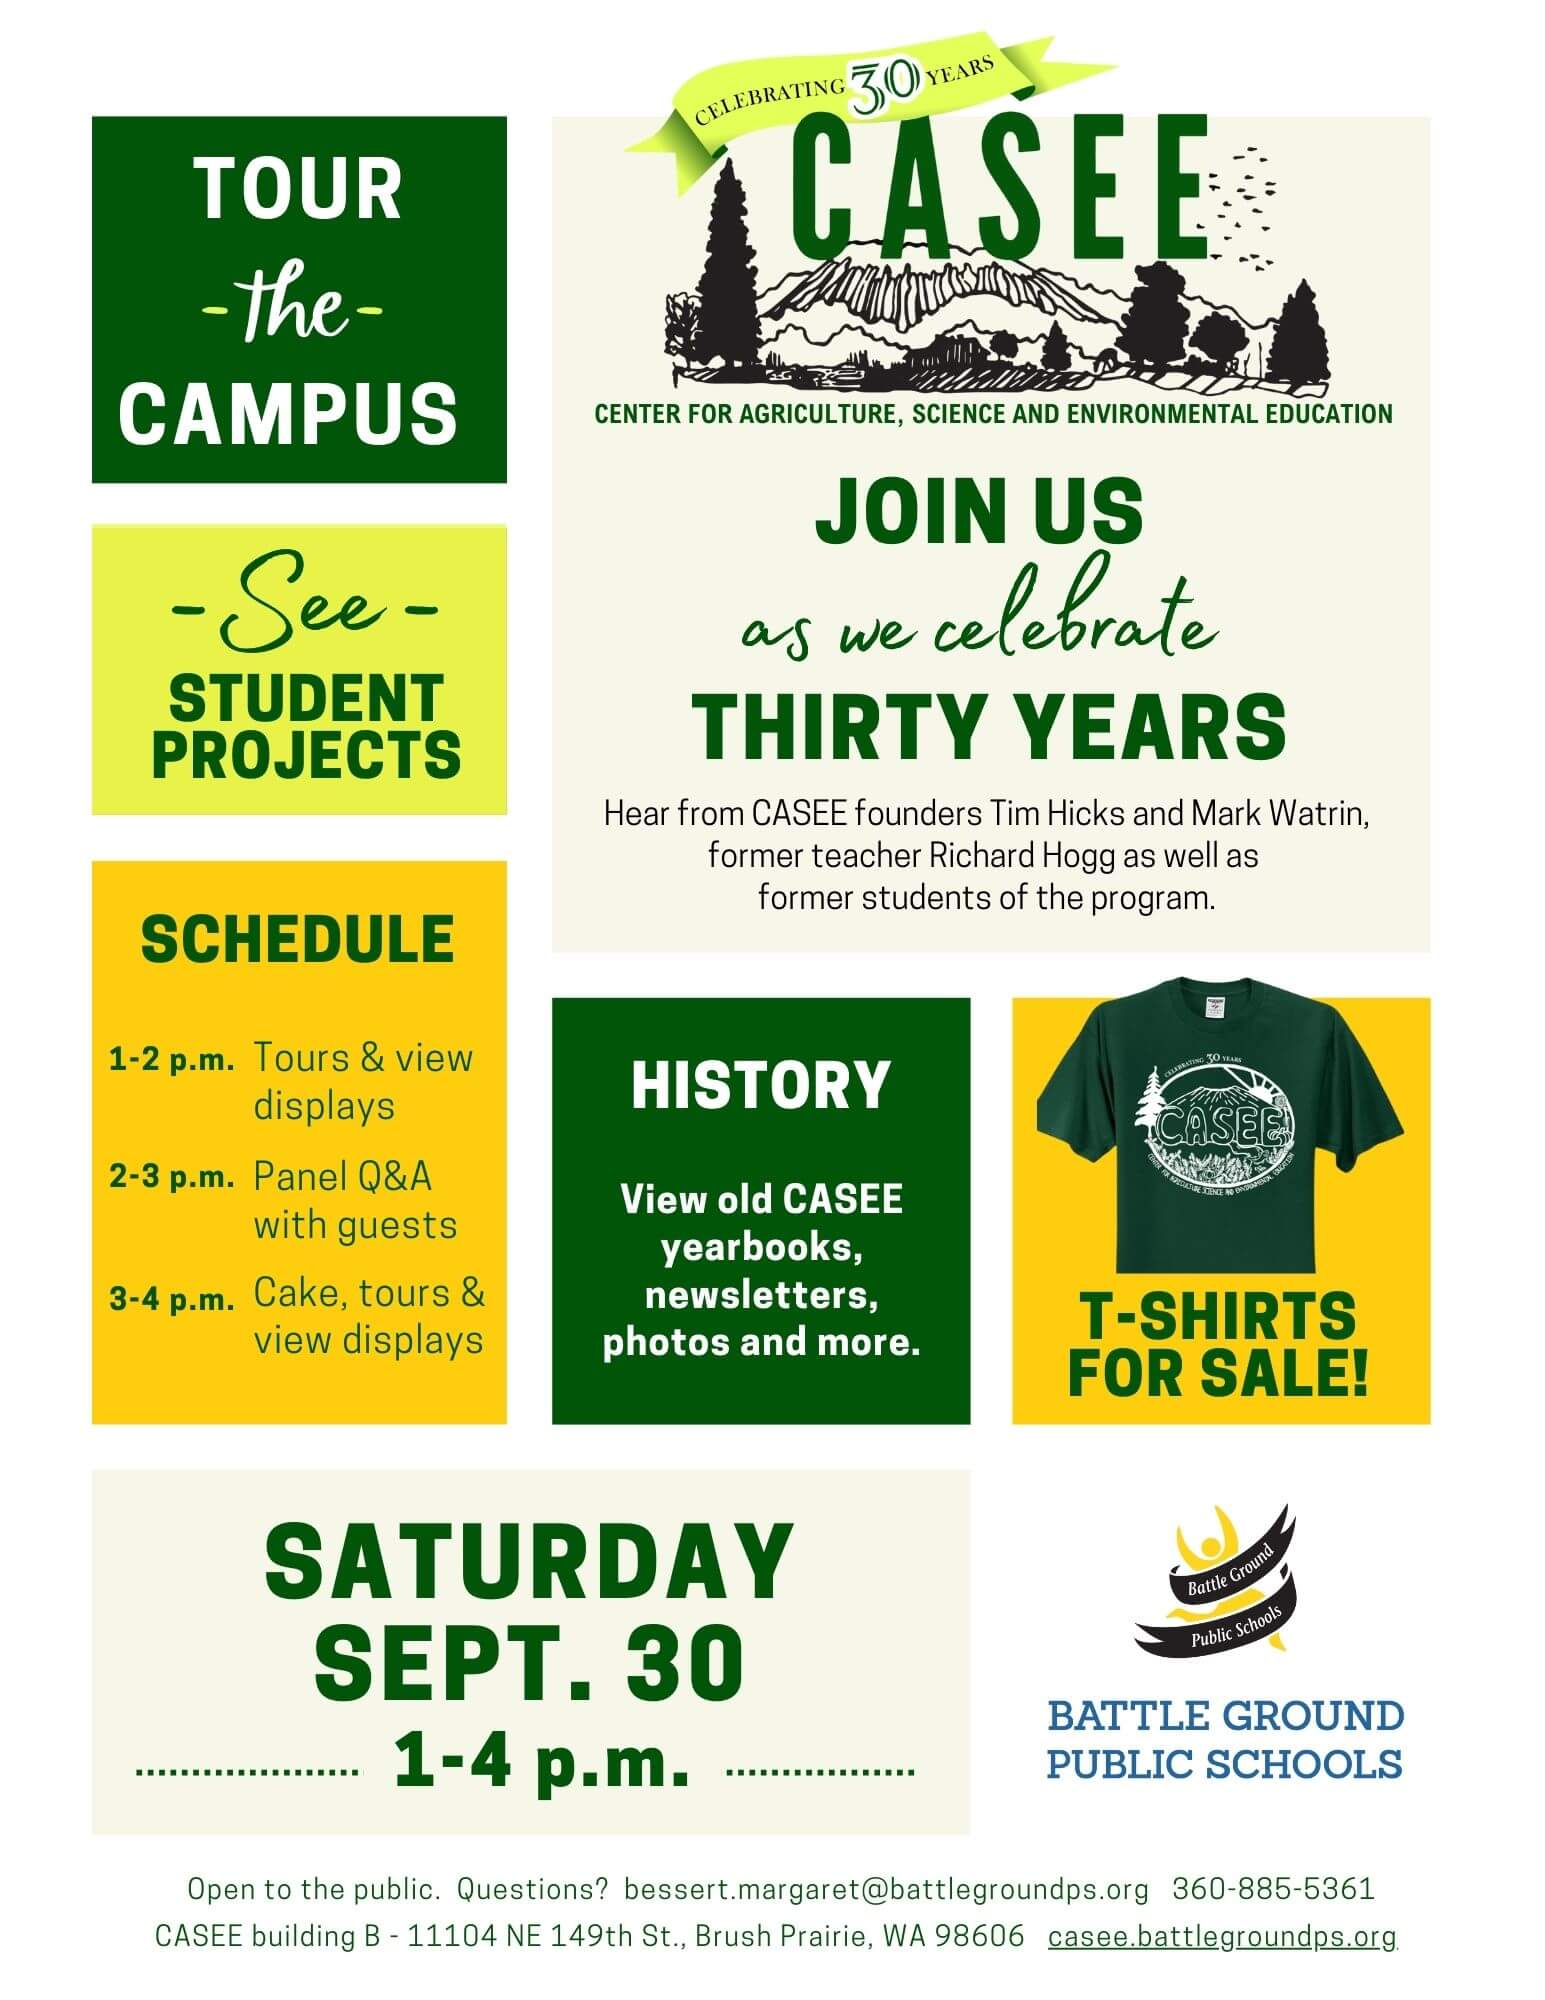 Join us as we celebrate 30 years. Hear from CASEE founders Mark Watrin, Tim Hicks and Richard Hogg, as well as former students. Tour the campus. See student projects. View old CASEE yearbooks, newsletters, photos and more. T-shirts for sale. Saturday, Sept. 30, 1 p.m. to 4 p.m. Open to the public. Questions? bessert.margaret@battlegroundps.org 360-885-5361. CASEE building B - 11104 NE 149th St., Brush Prairie, WA 98606 casee.battlegroundps.org